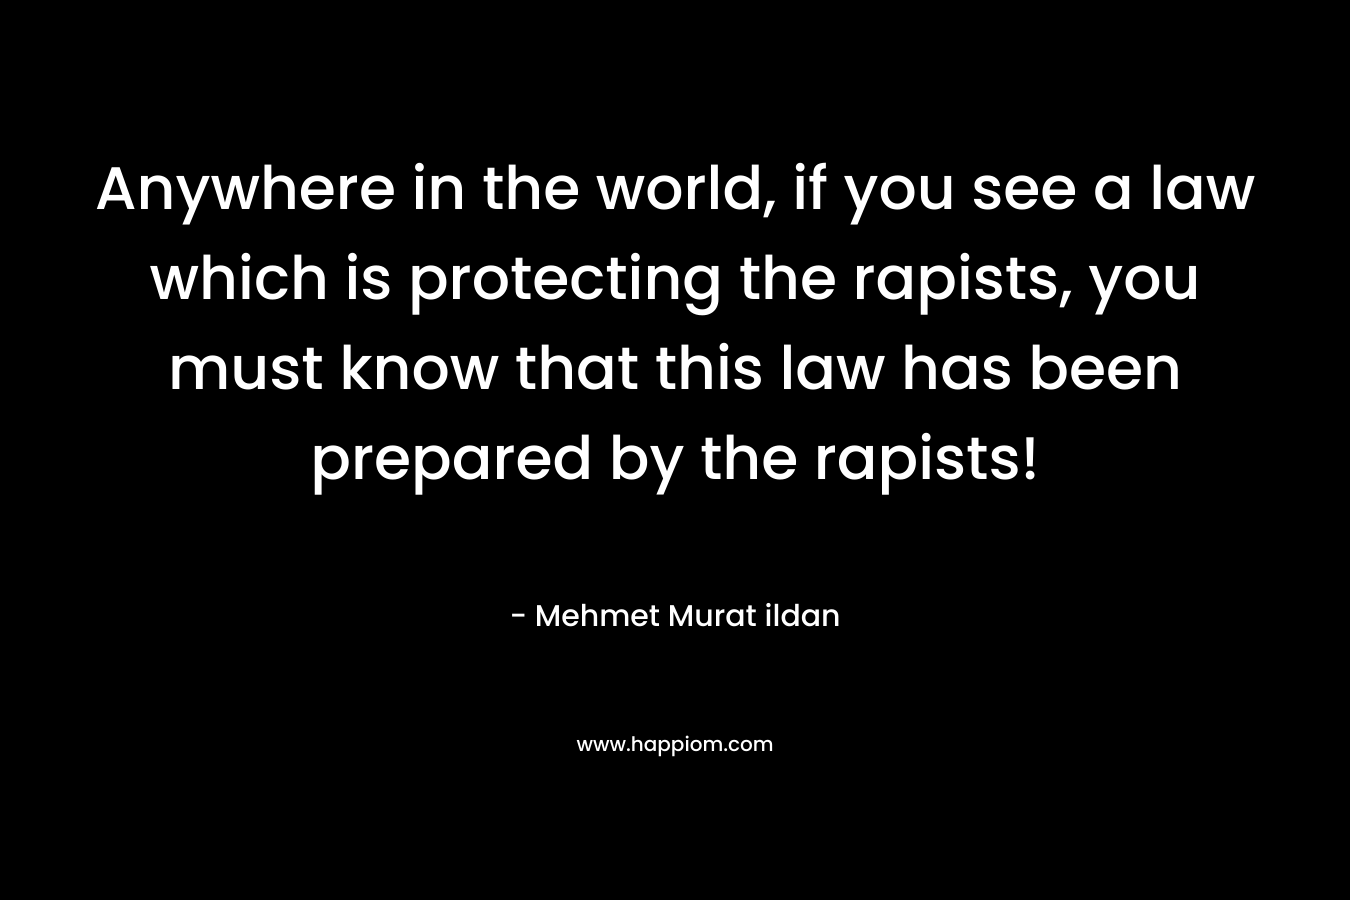 Anywhere in the world, if you see a law which is protecting the rapists, you must know that this law has been prepared by the rapists!